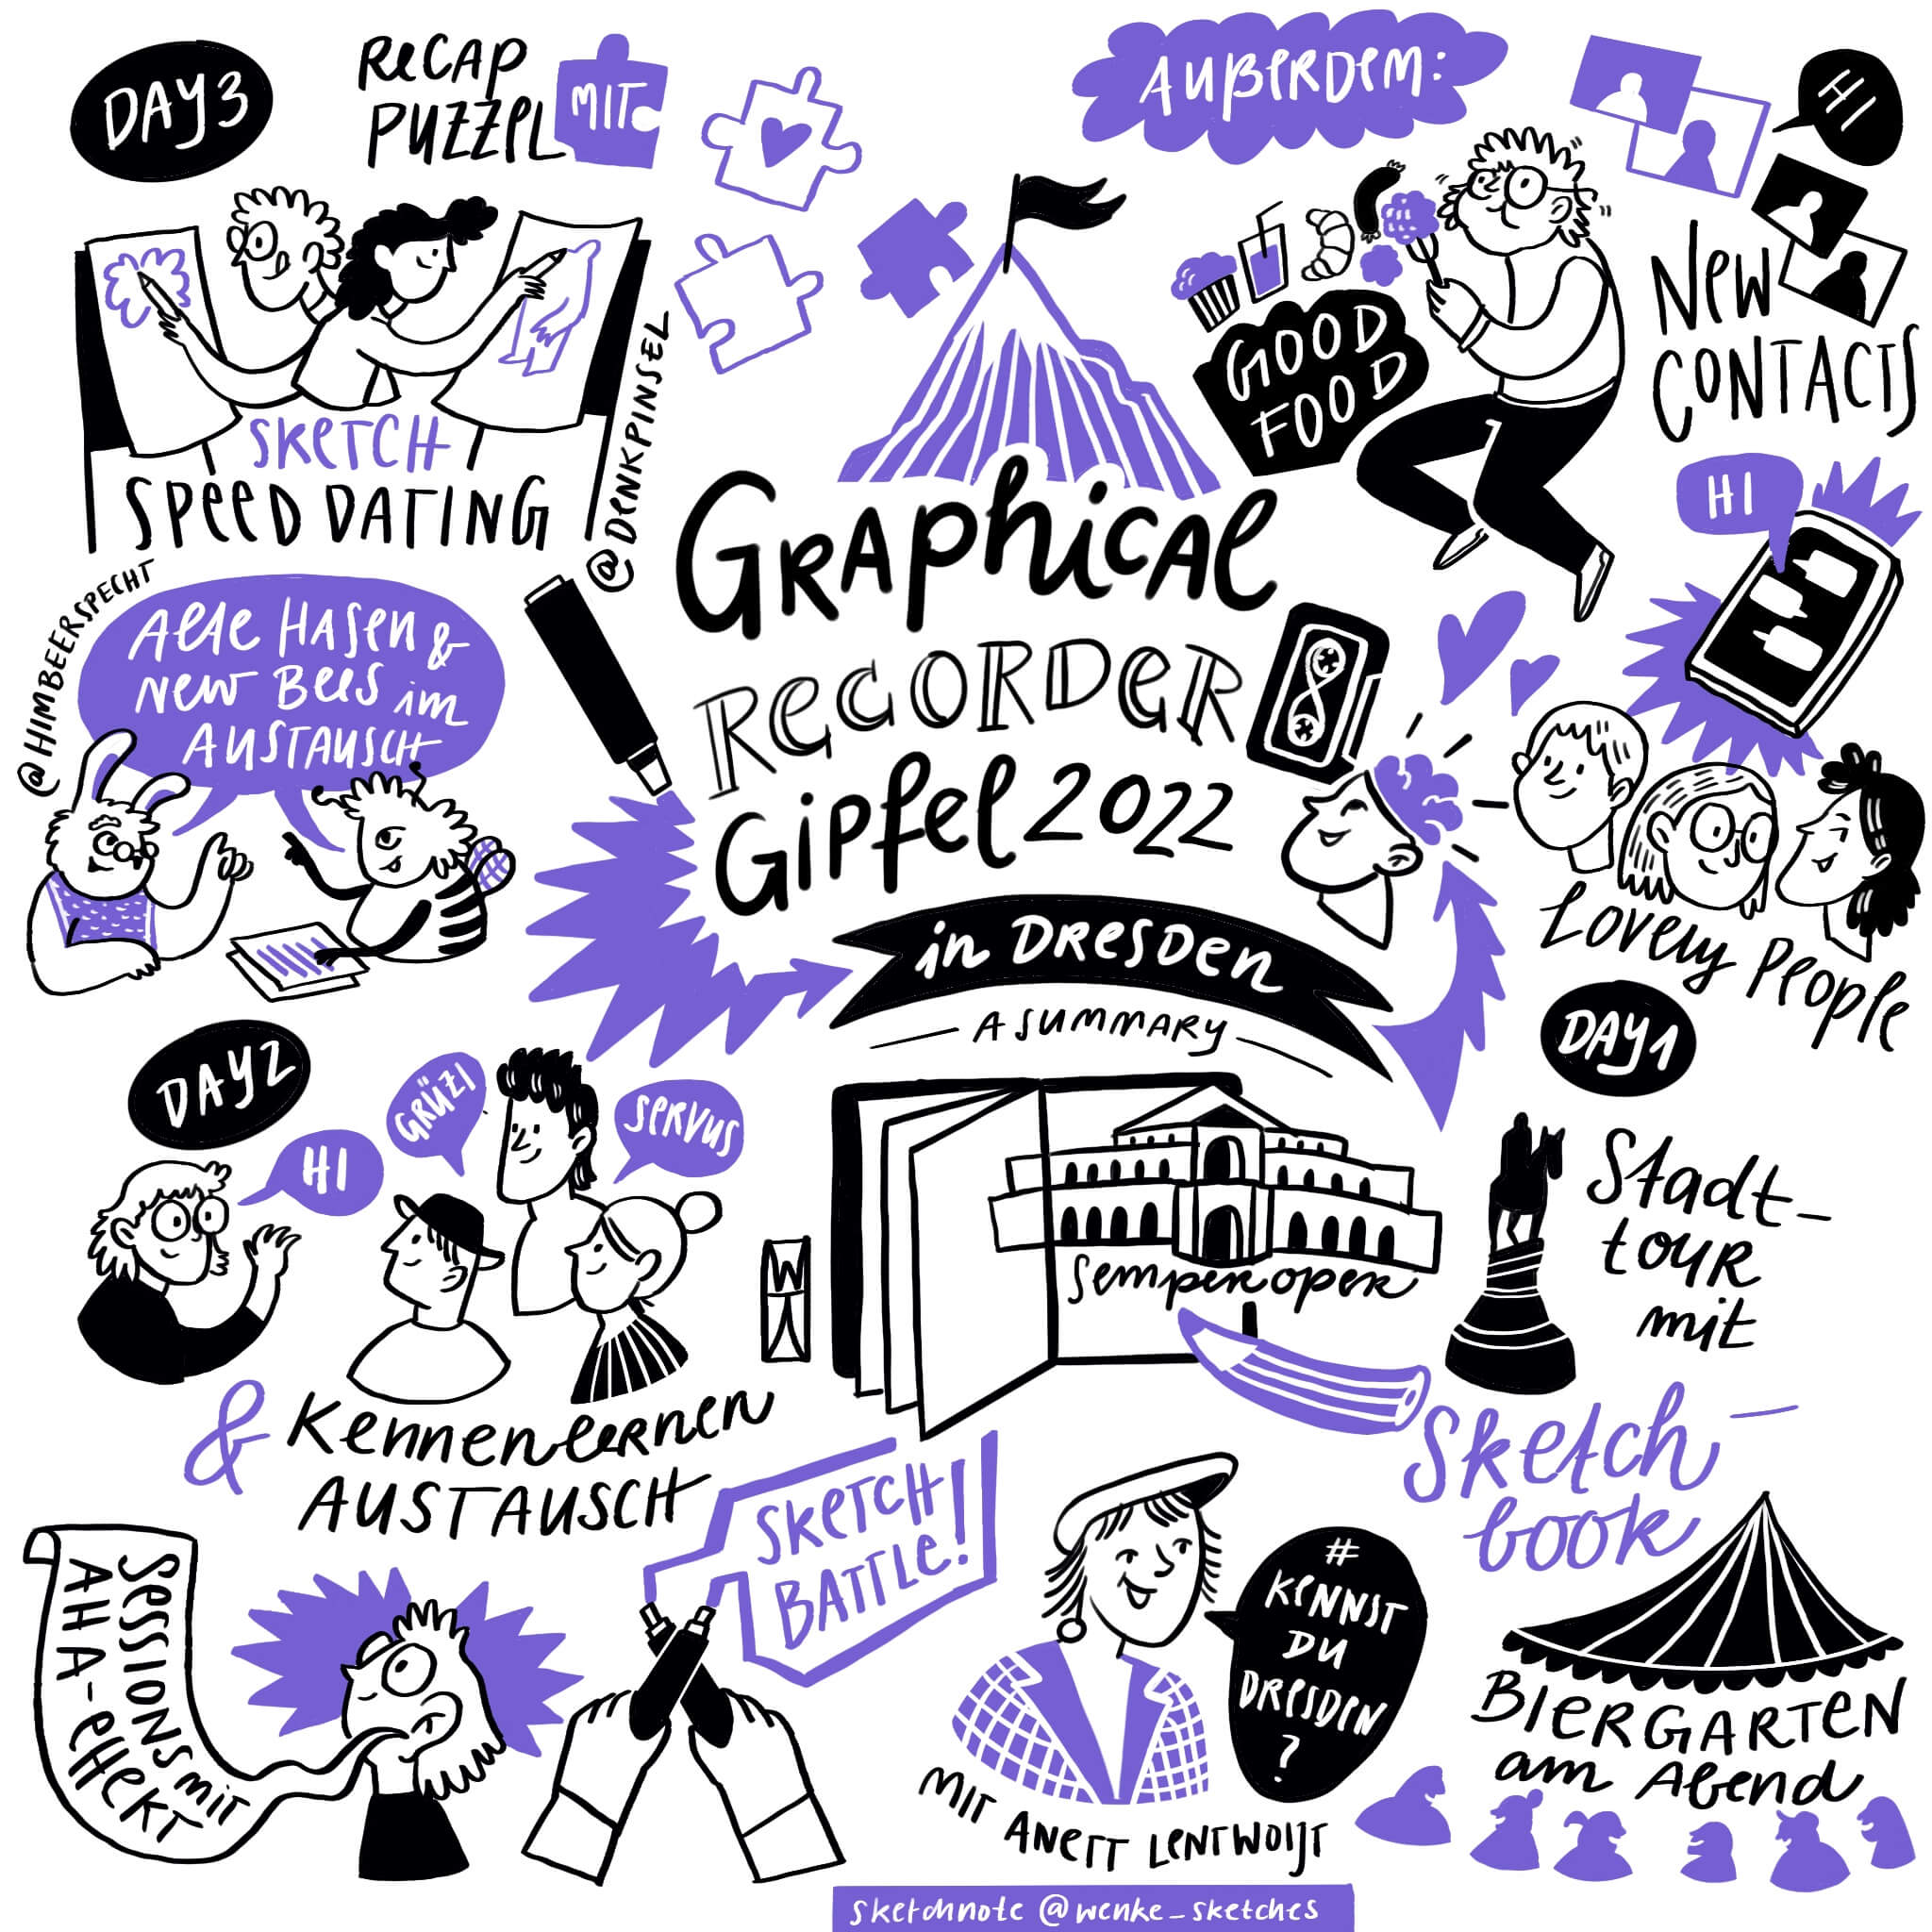 sketchnote about the graphical recorder gipfel 2022 in Dresden